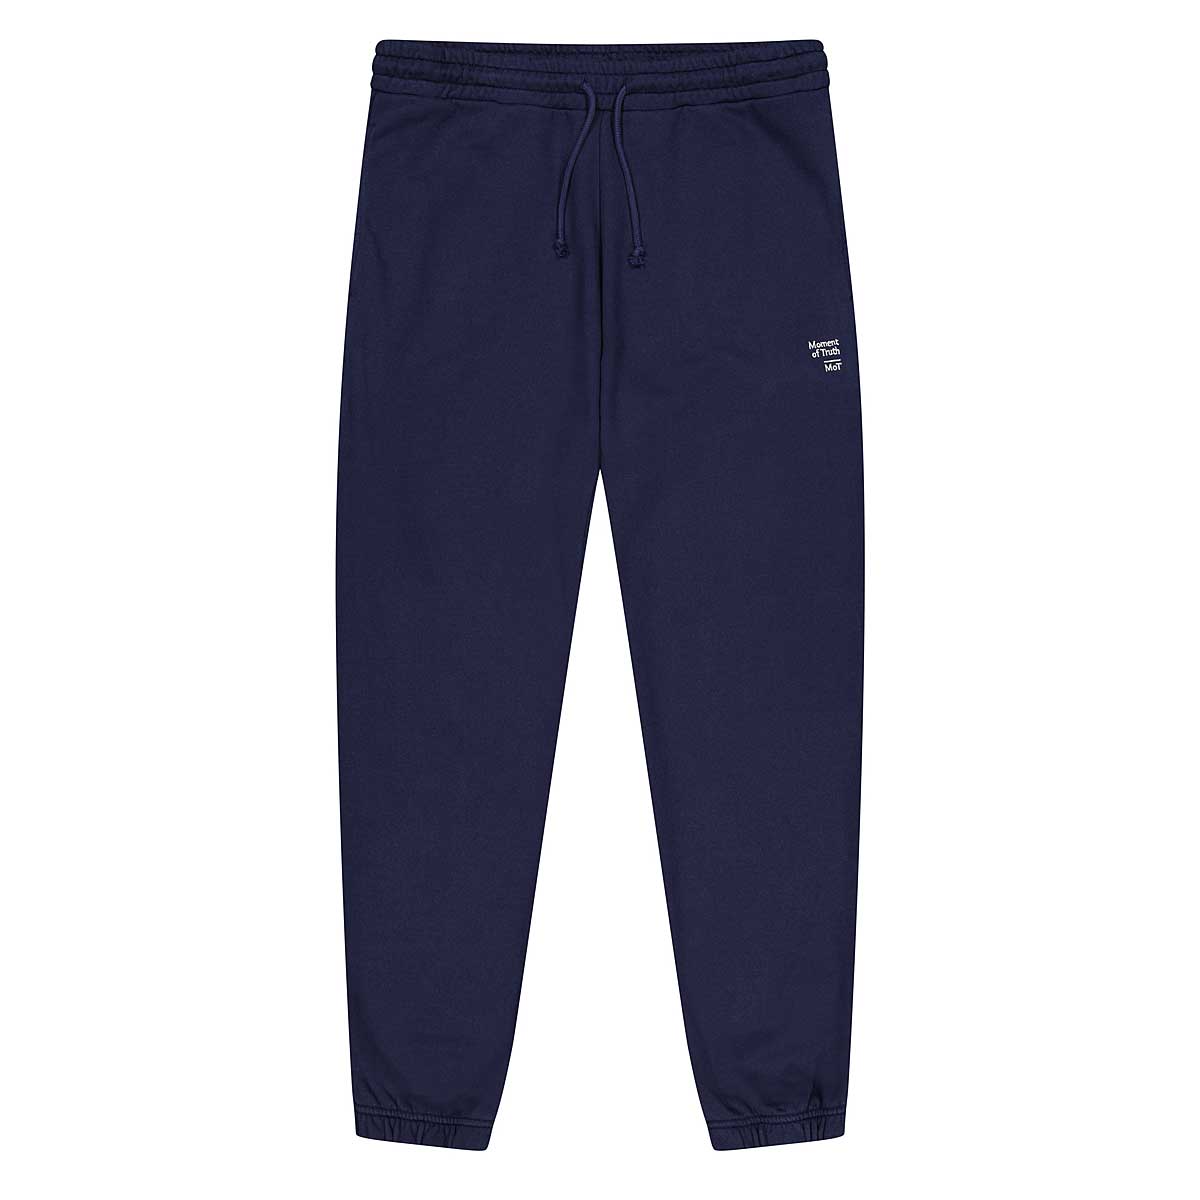 Moment Of Truth Lux Sweatpants, Peacoat